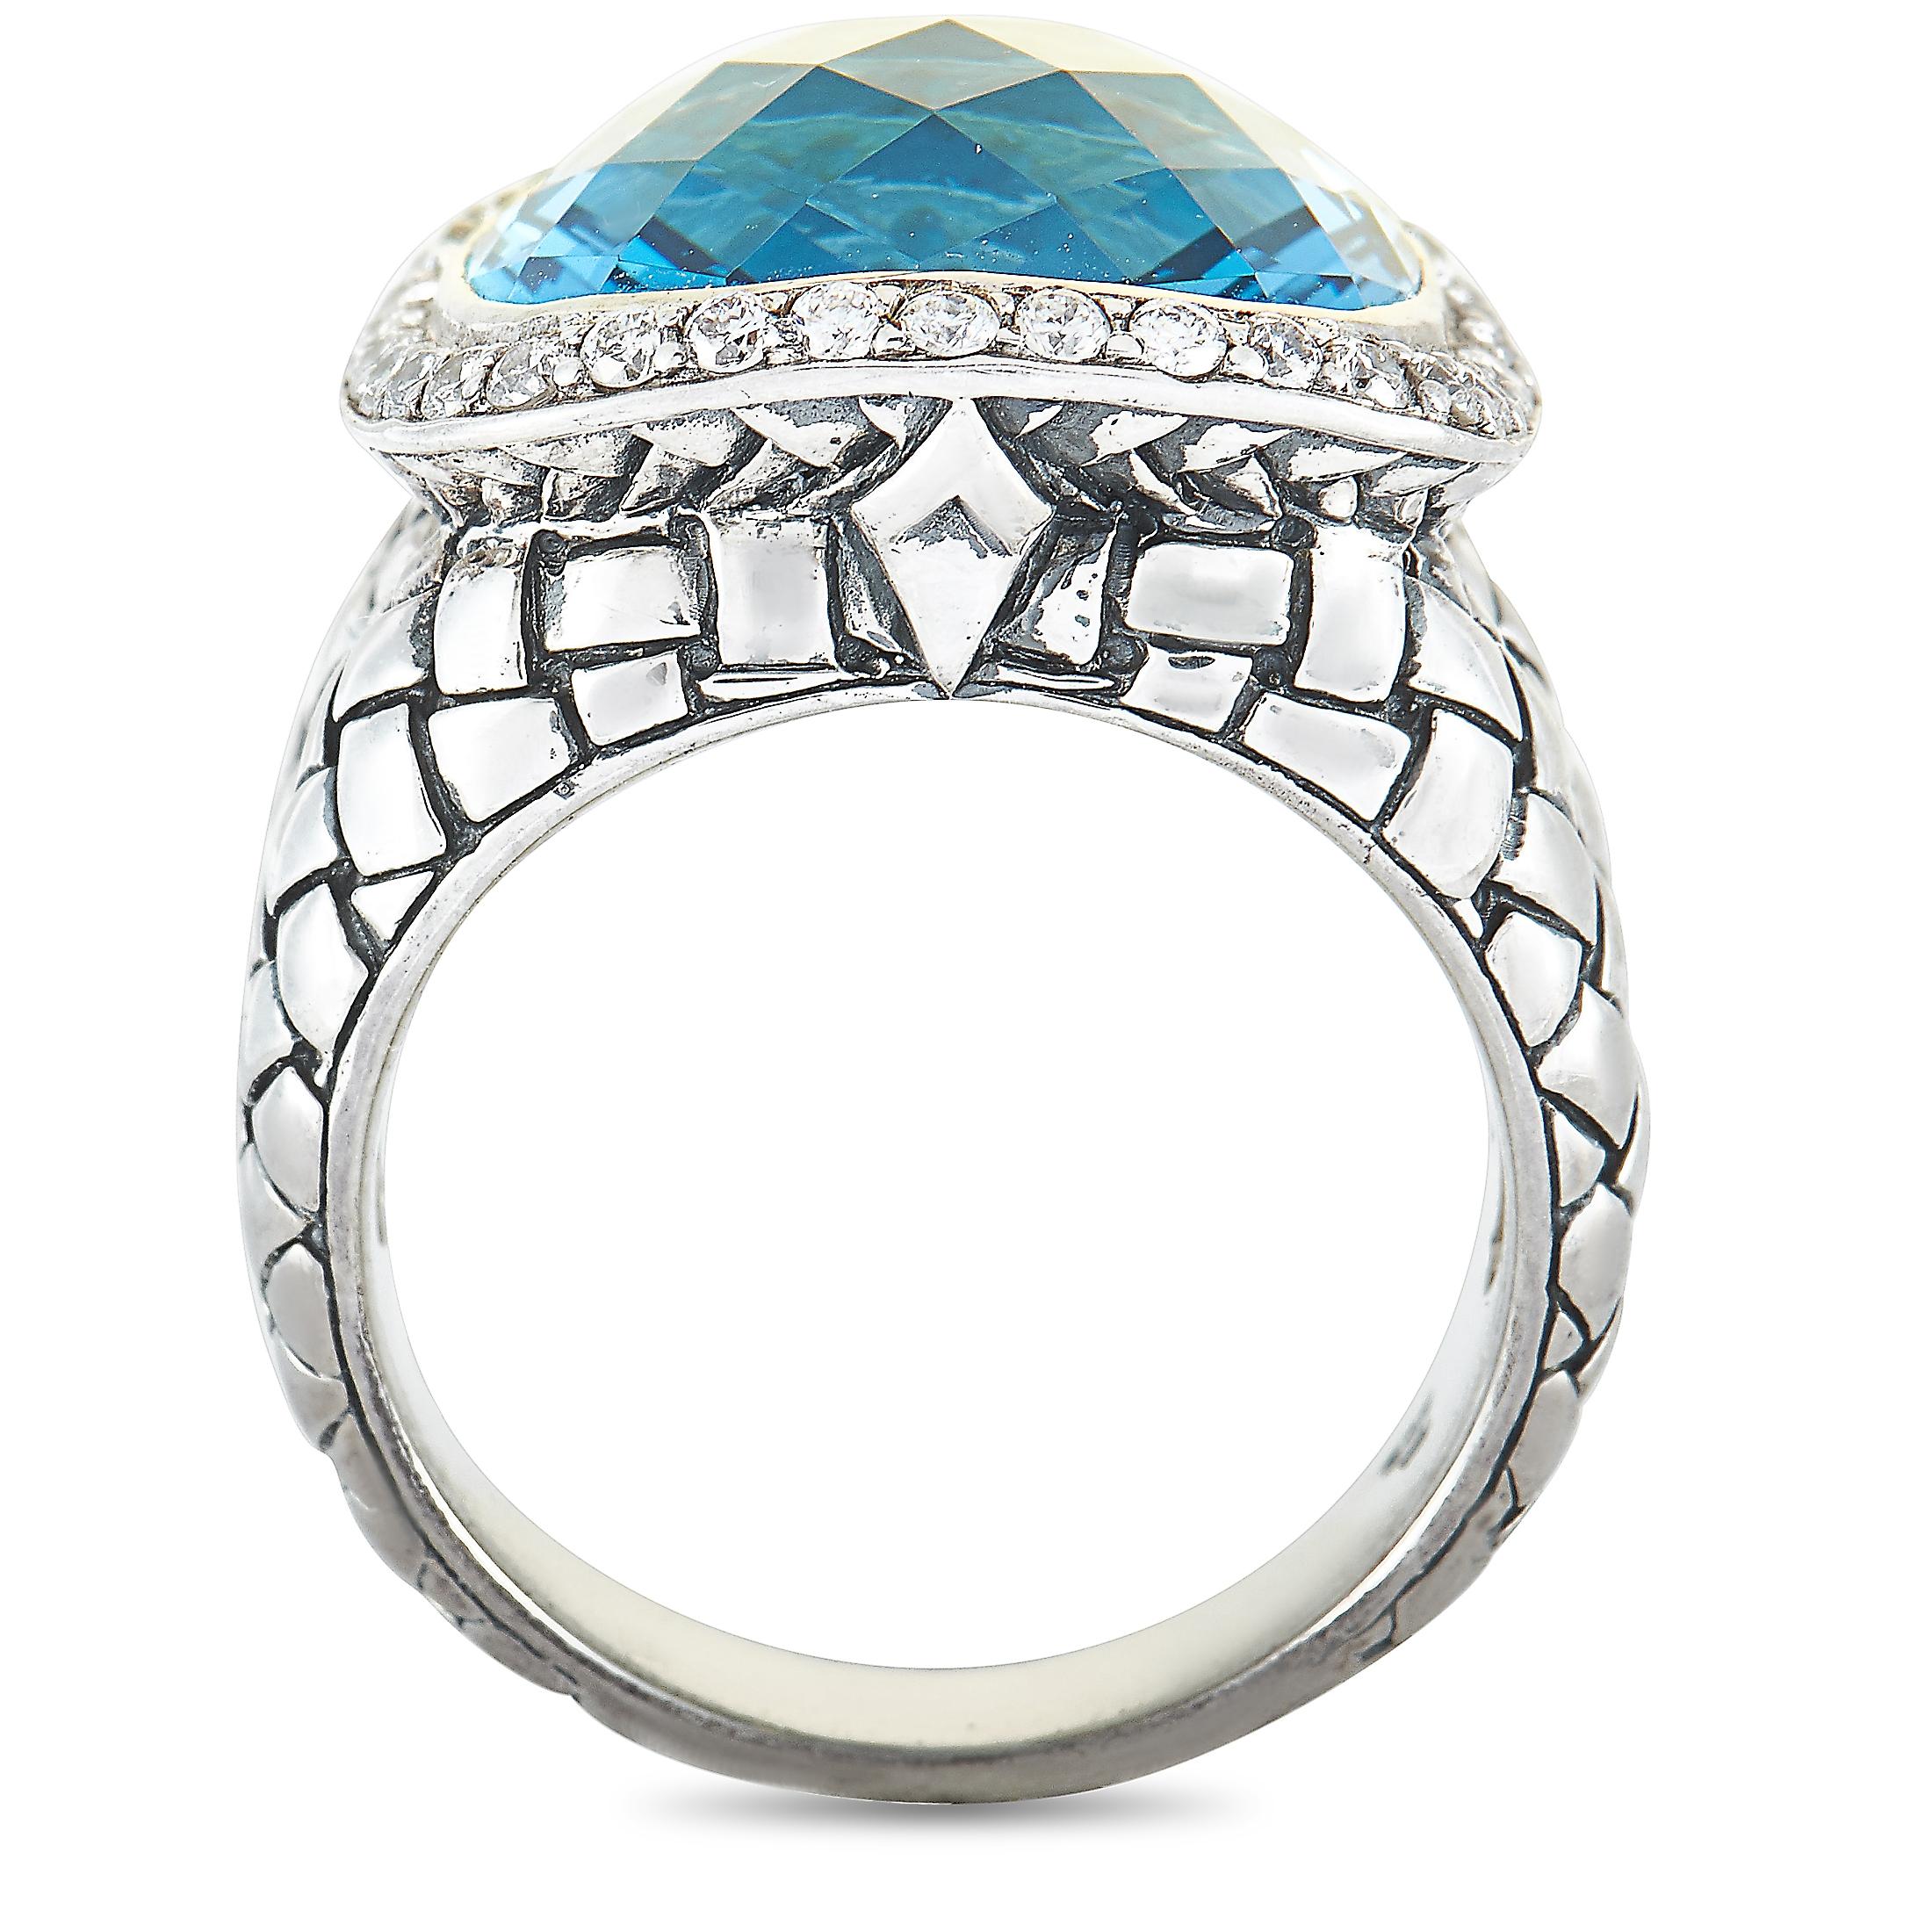 This Scott Kay ring is crafted from sterling silver and weighs 12.6 grams, boasting band thickness of 5 mm and top height of 10 mm, while top dimensions measure 17 by 17 mm. The ring is set with a blue topaz and a total of 0.44 carats of